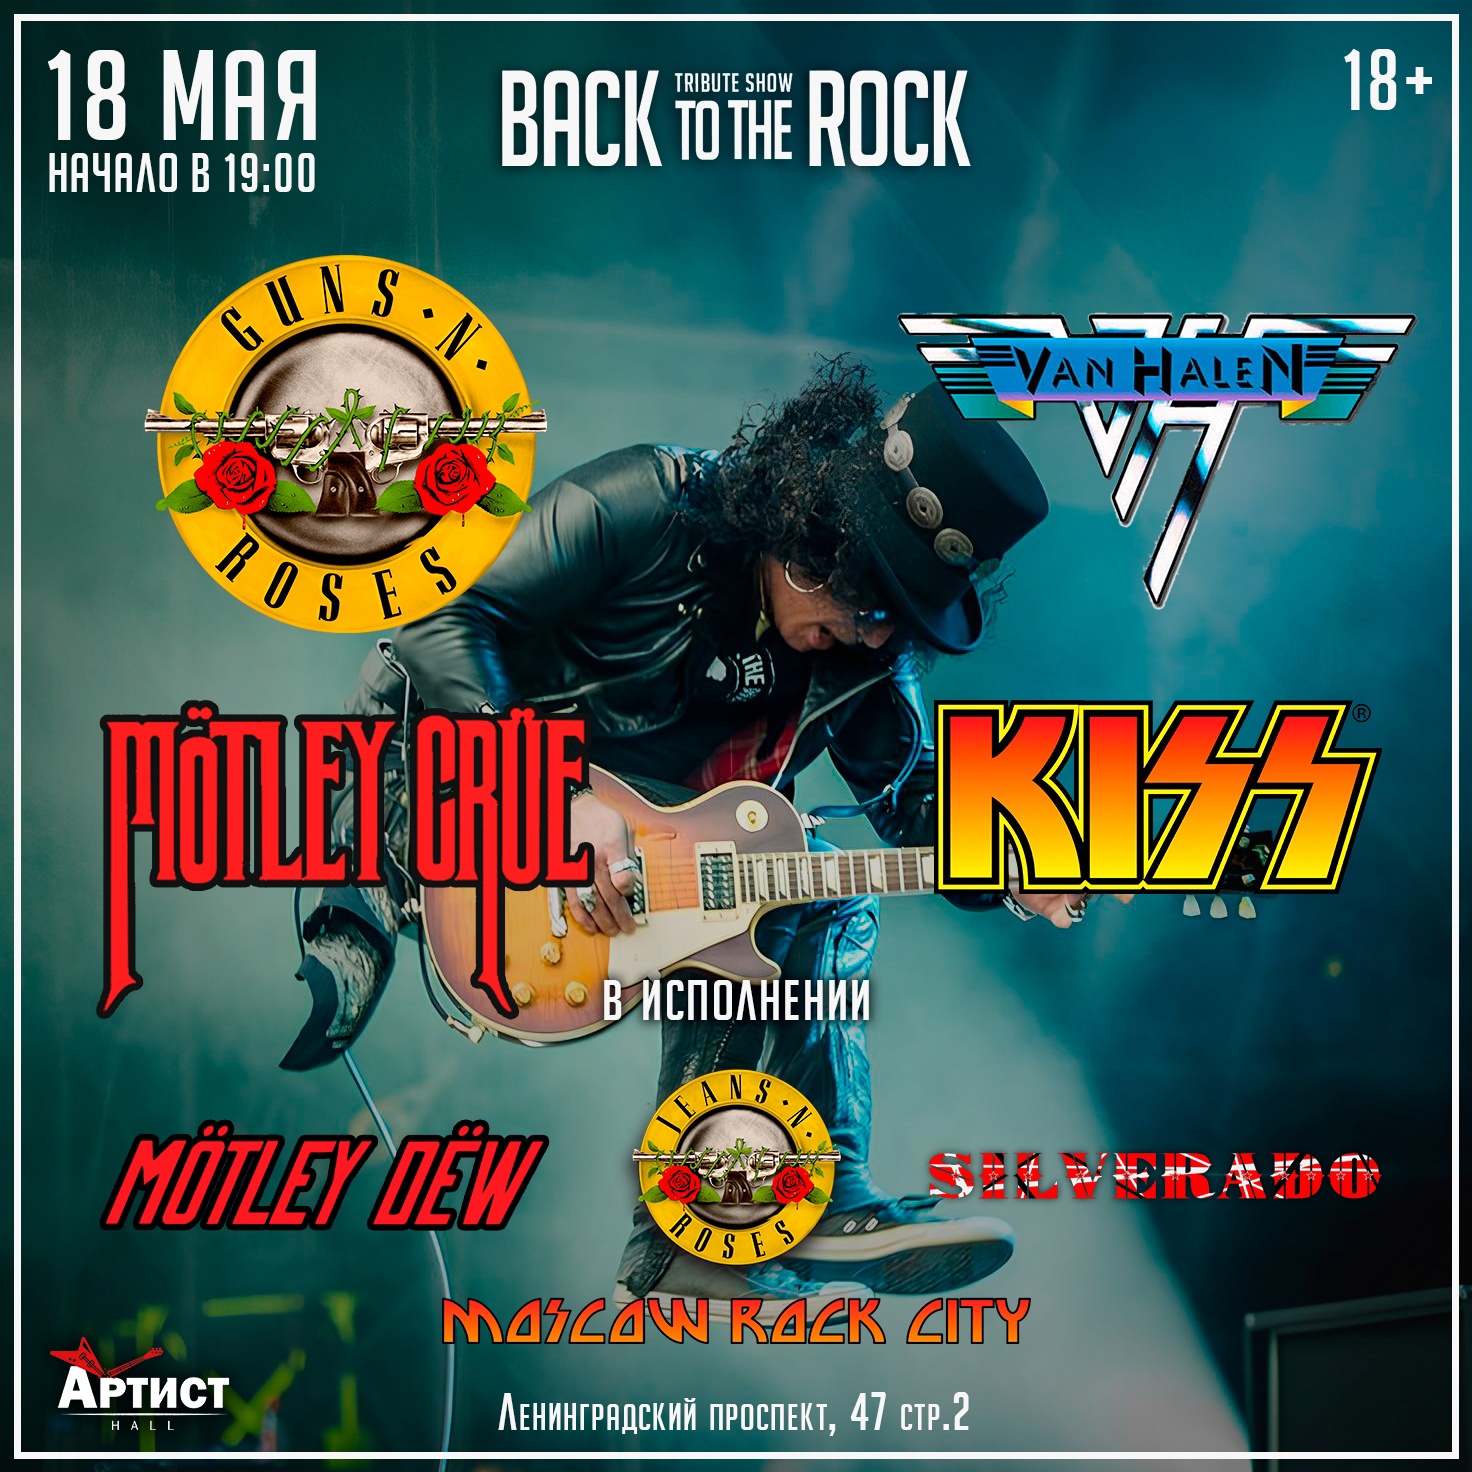 ???? Moscow Rock City на трибьют-шоу Back To The Rock ????